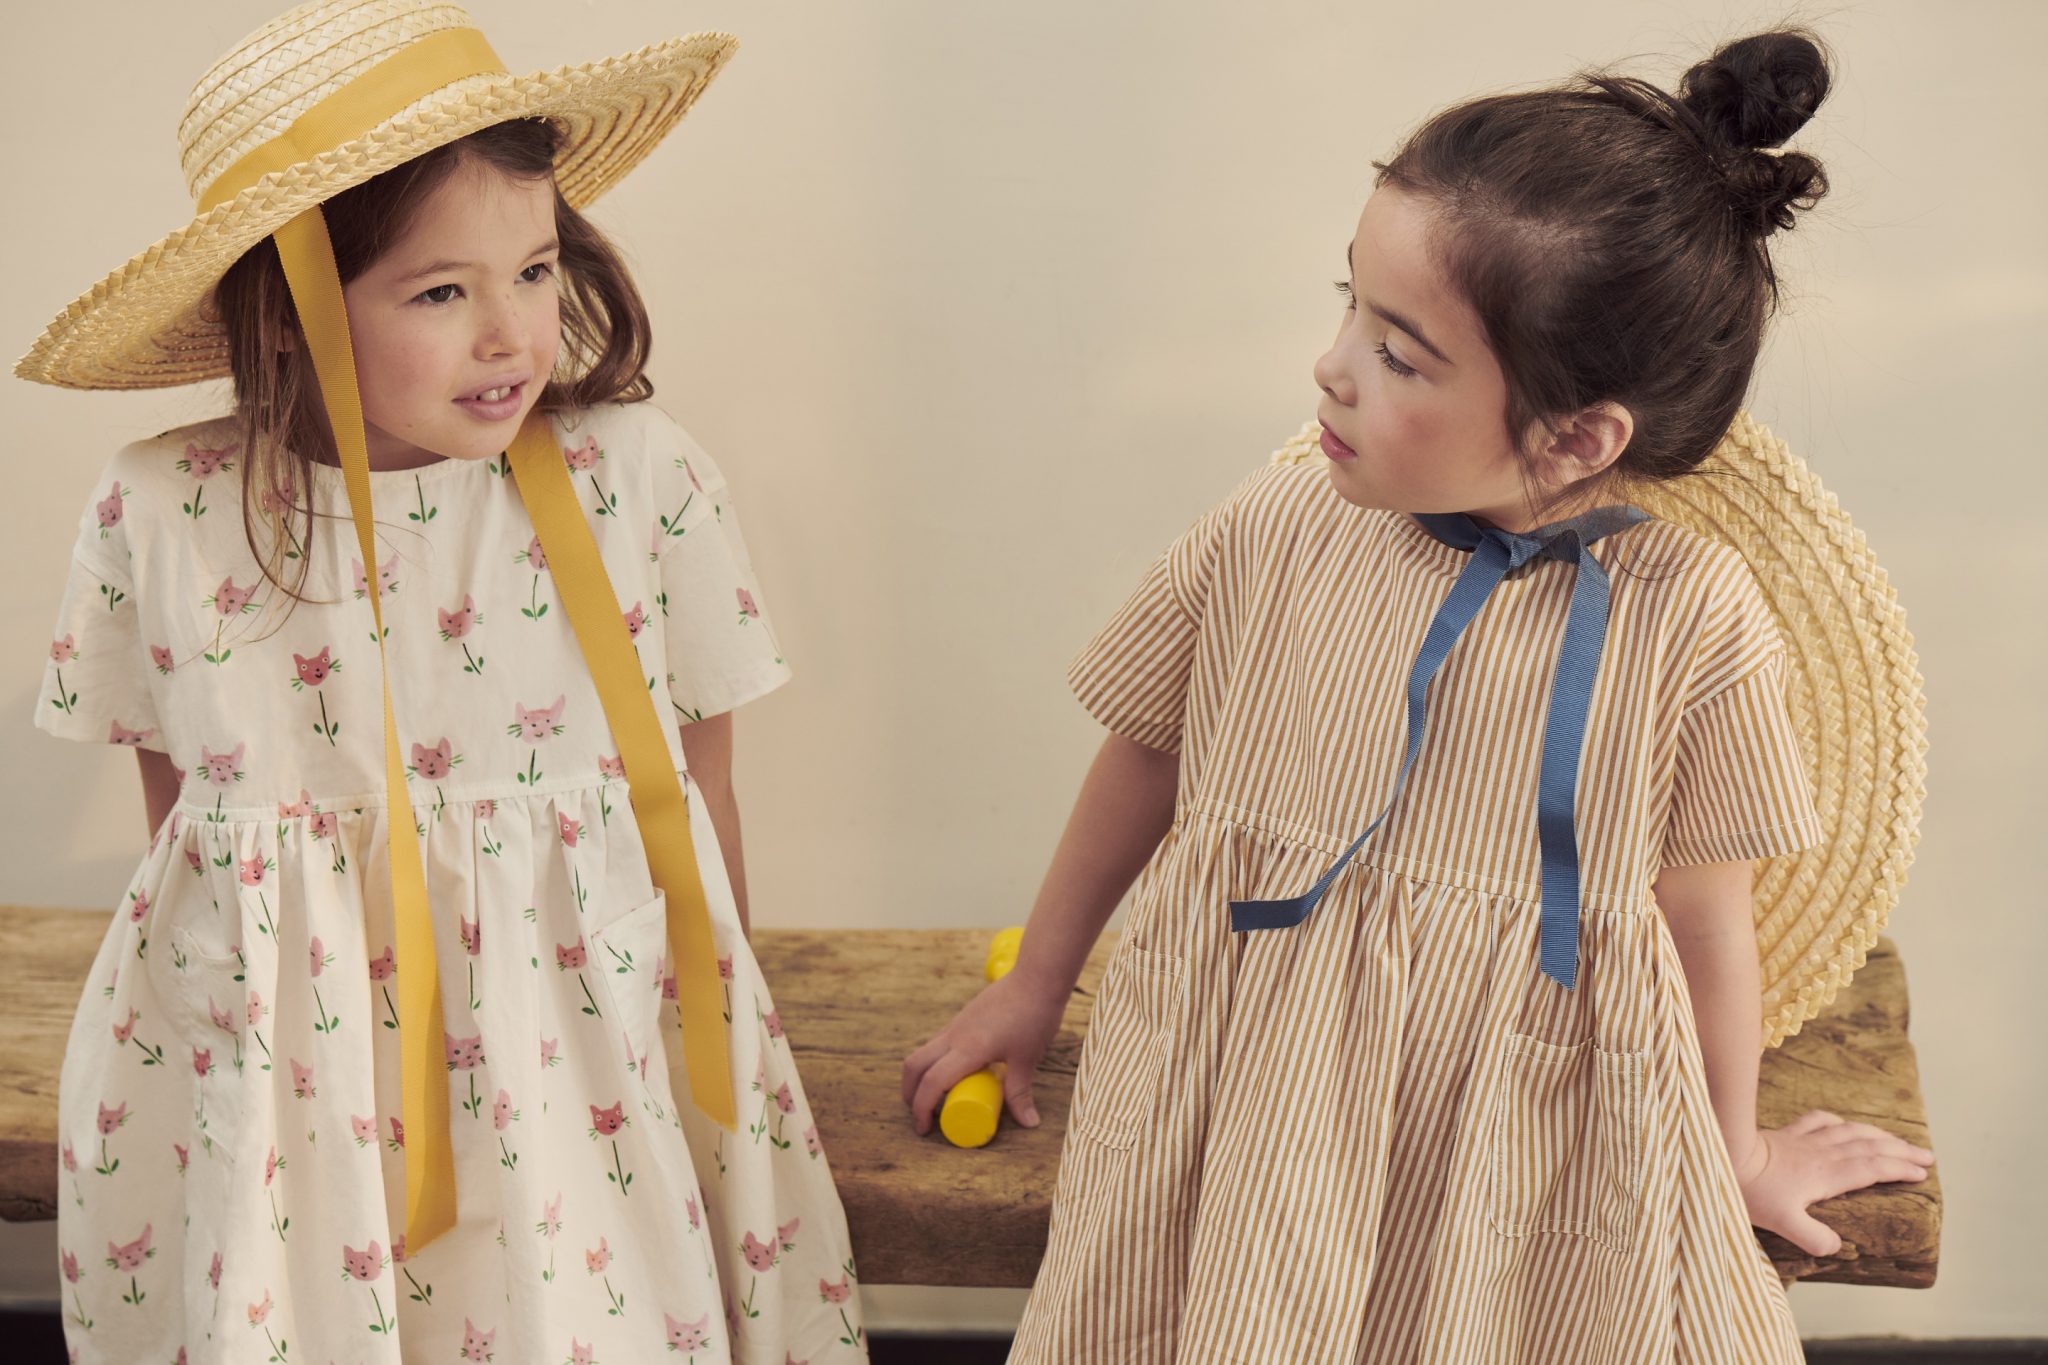 Maisonette_Maison-Mini-Collection-5 Fashion Favorite Maisonette Launches First In-House Clothing Collection for Children